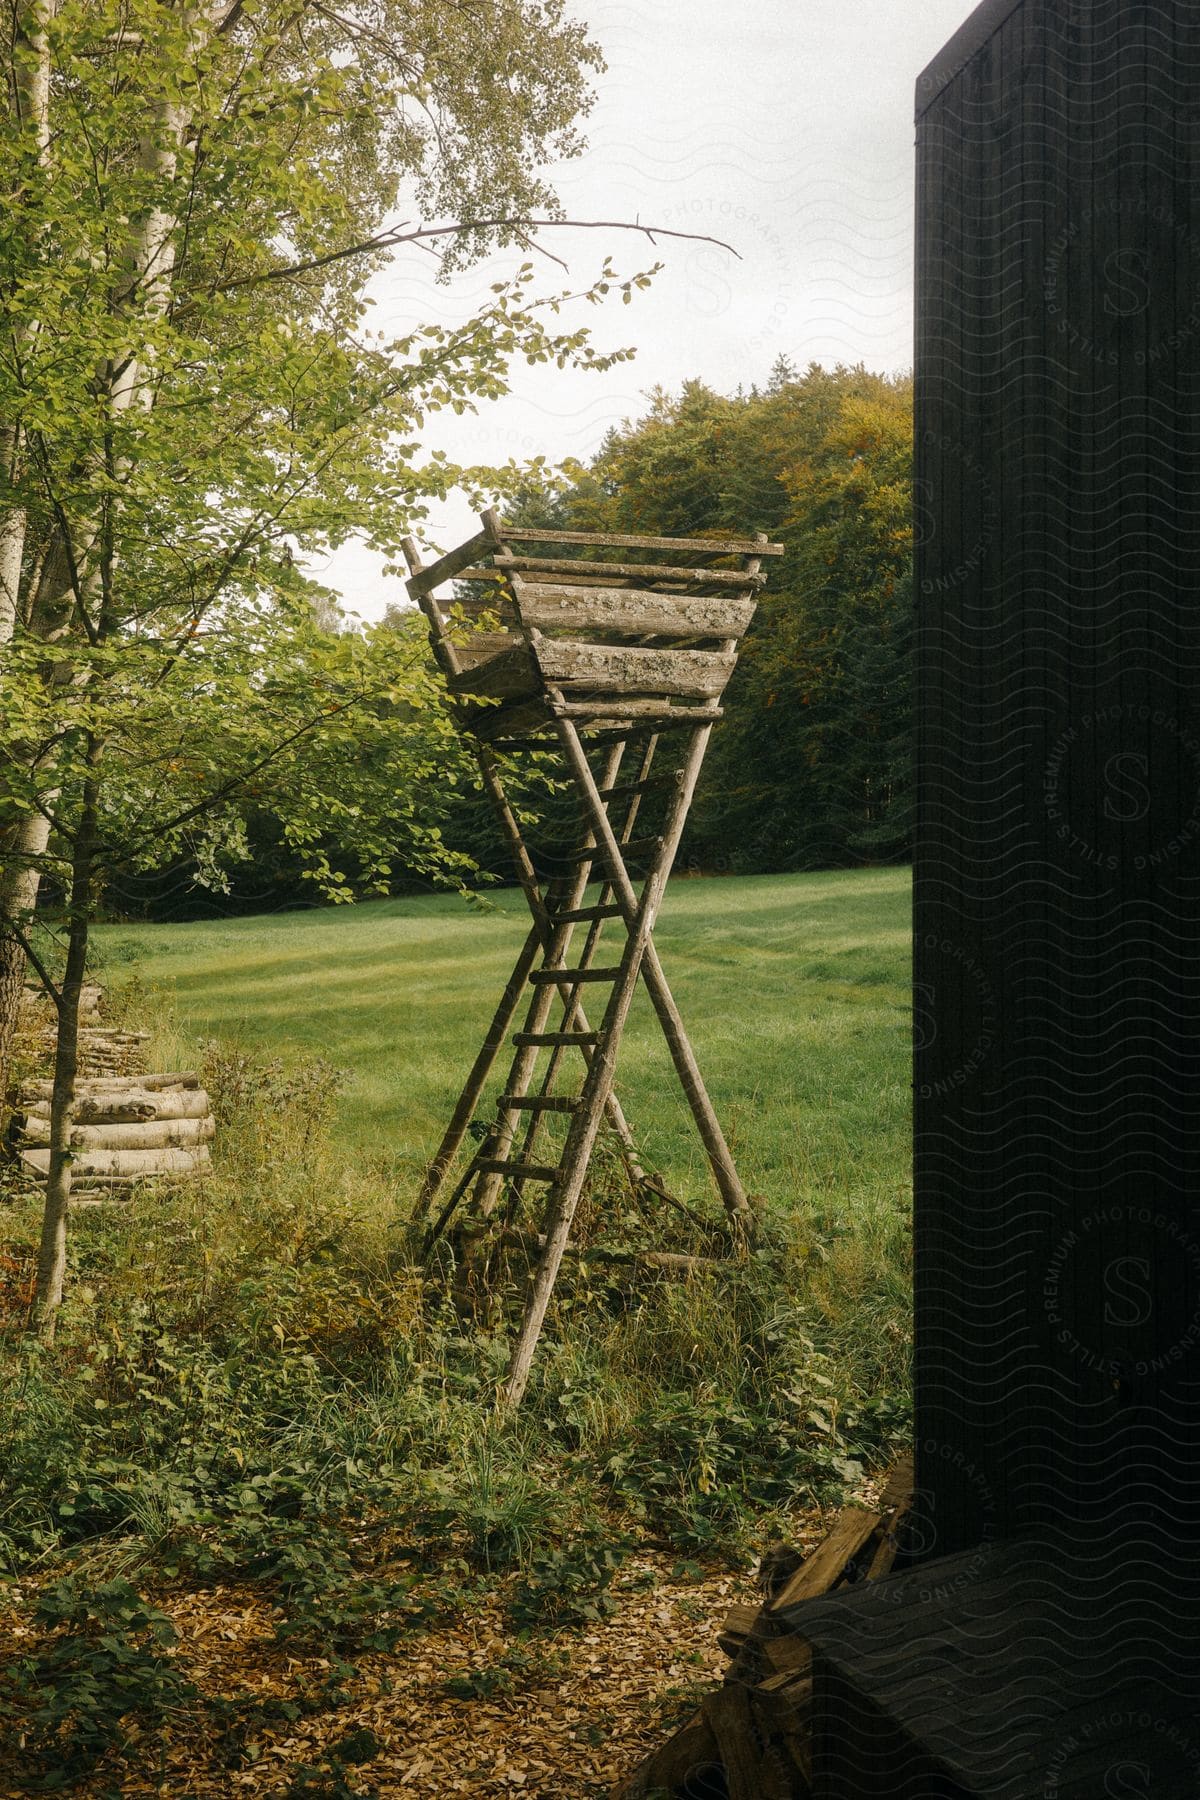 A ladder out in the woods near some grass.